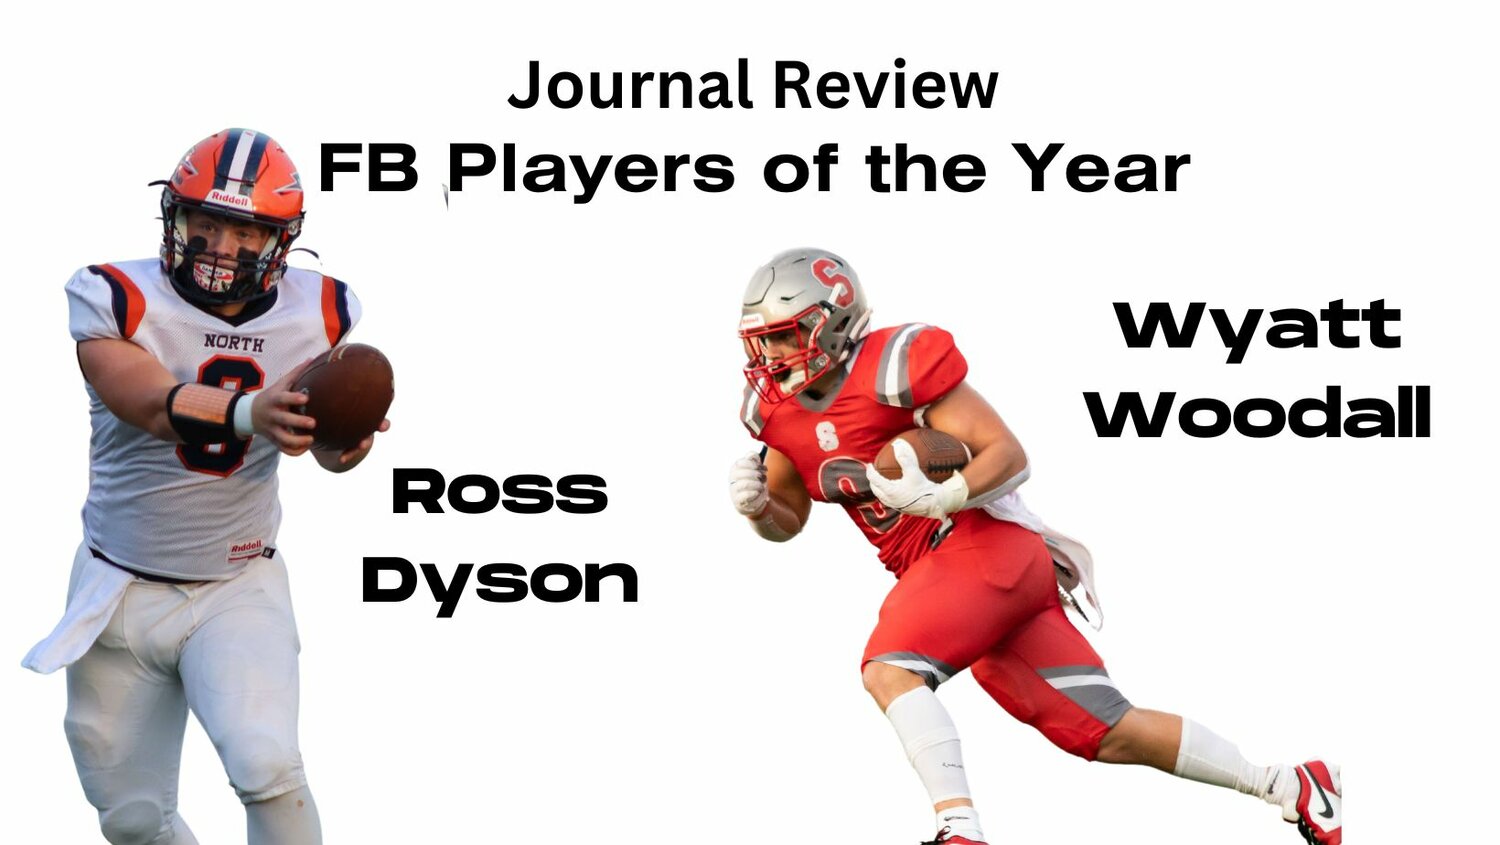 Seniors Ross Dyson of North Montgomery and Wyatt Woodall of Southmont both saved their best seasons of their careers for this past fall and now share the title of Journal Review Football Players of the Year.